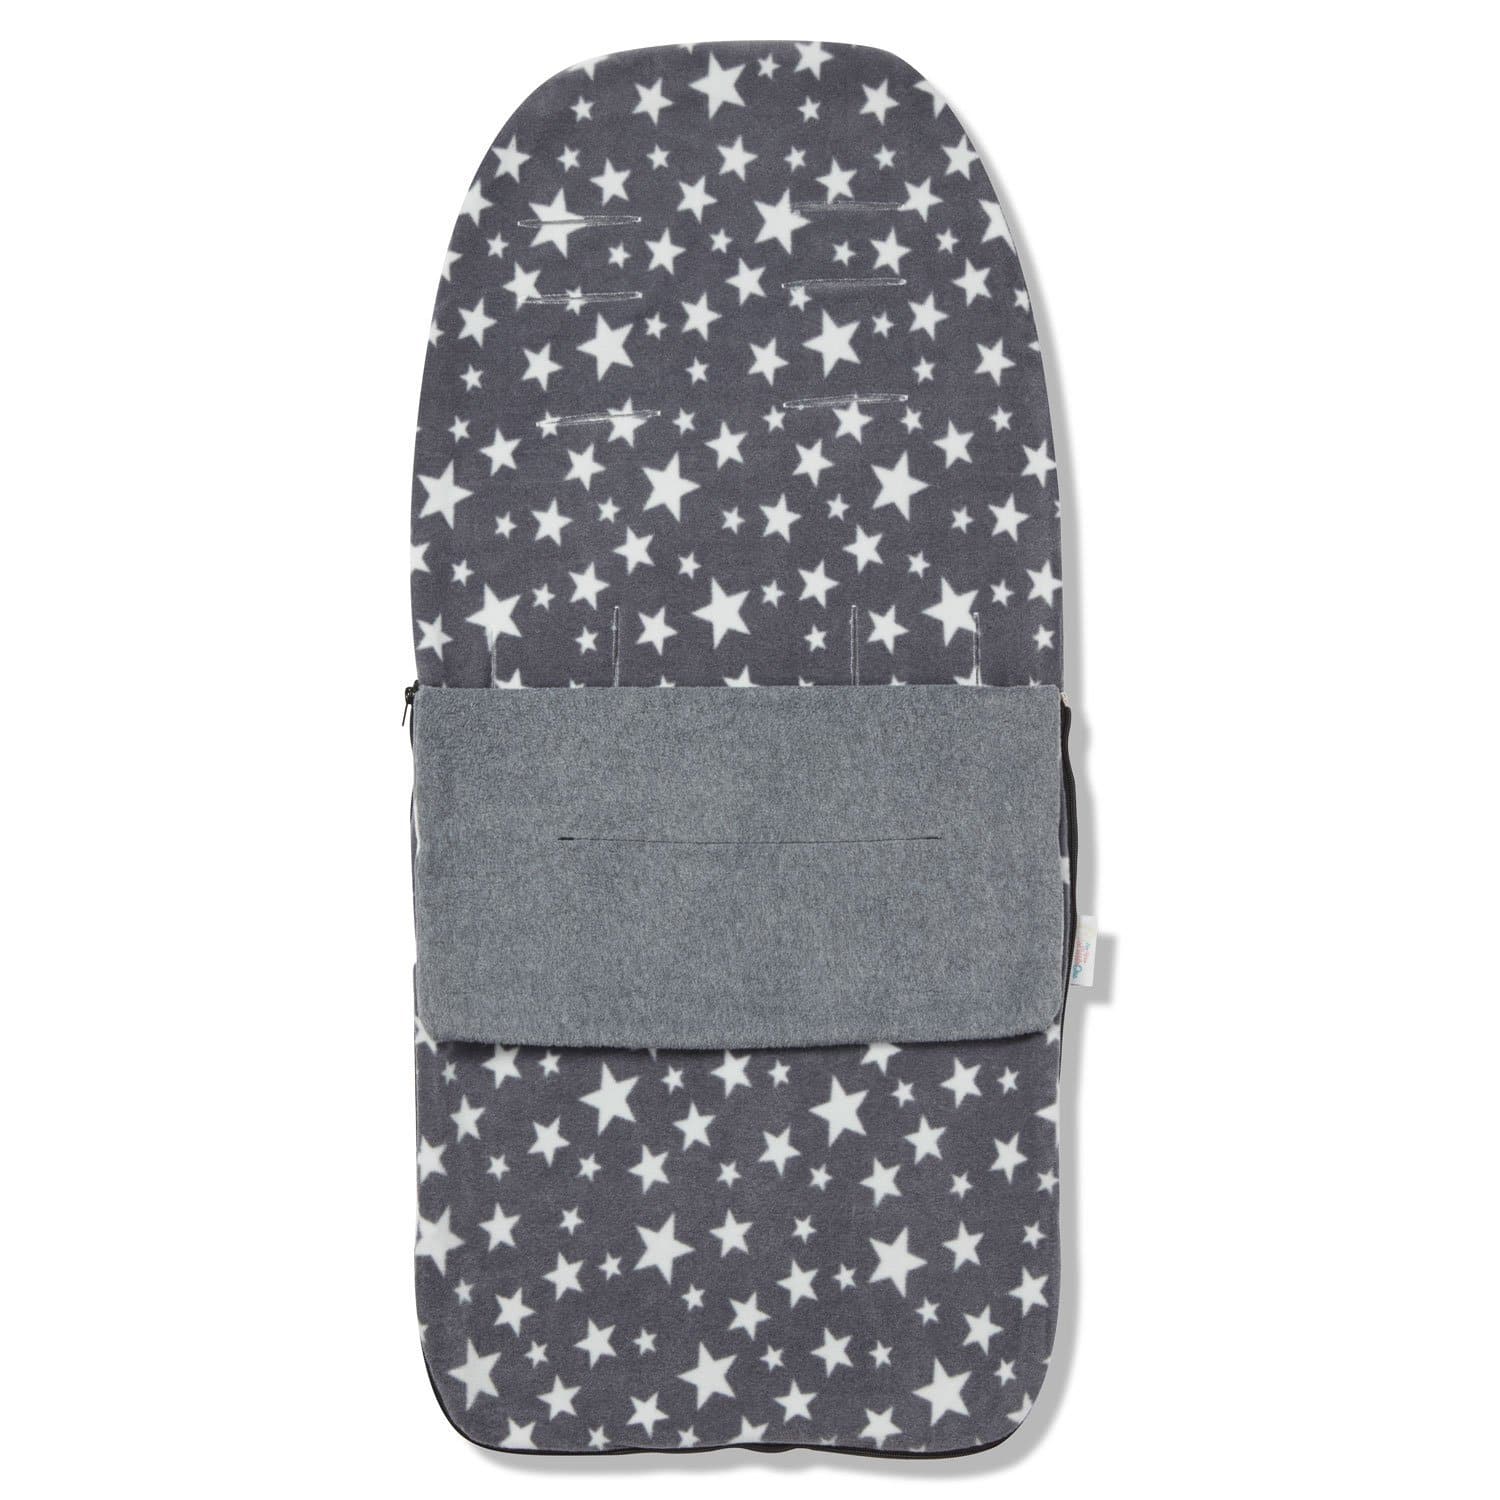 Snuggle Summer Footmuff Compatible with Noukies - Grey Star / Fits All Models | For Your Little One